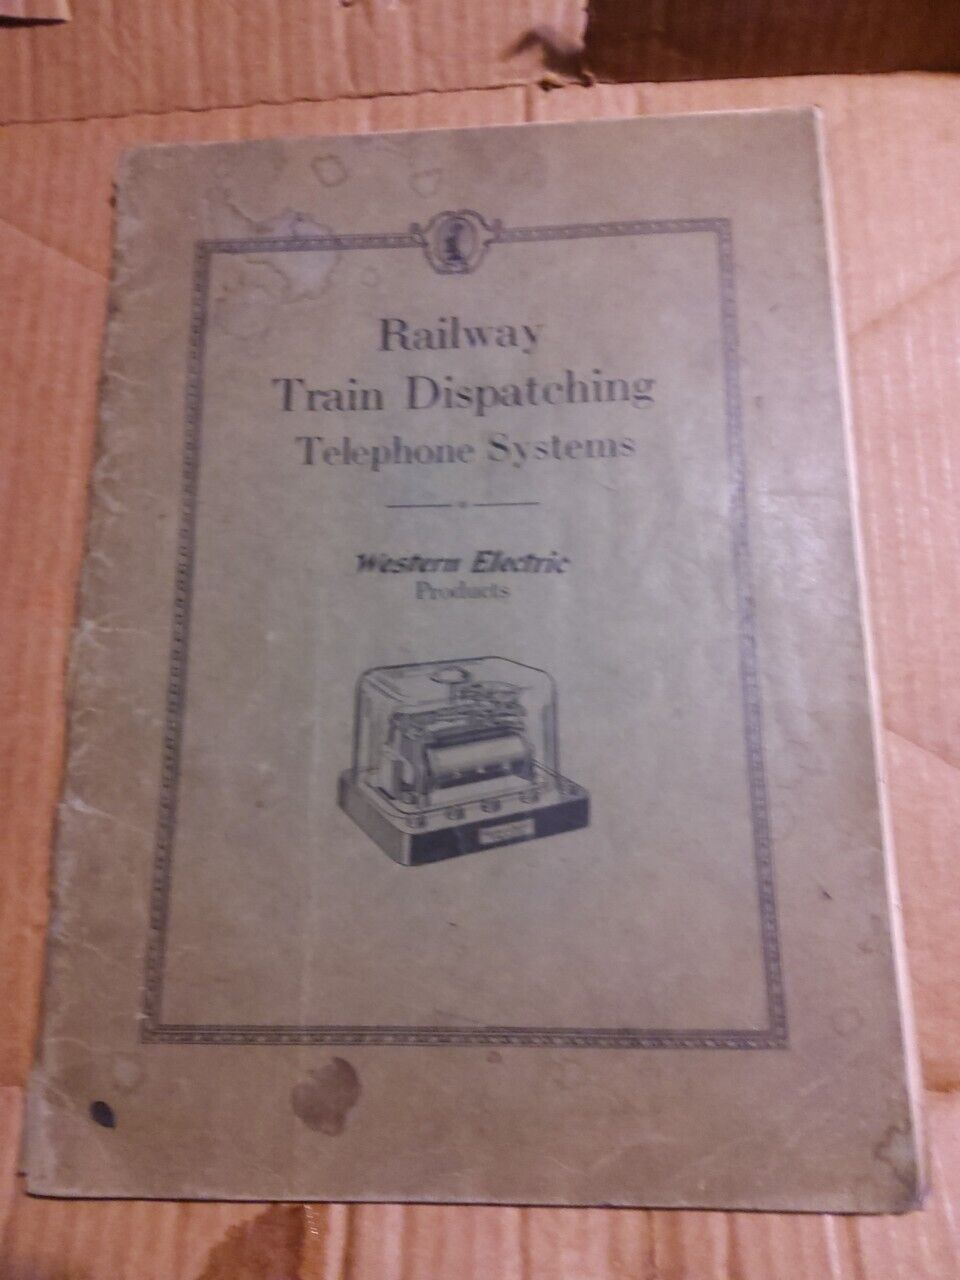 Vintage Western Electric Railway Train Dispatching Telephone Systems Catalog